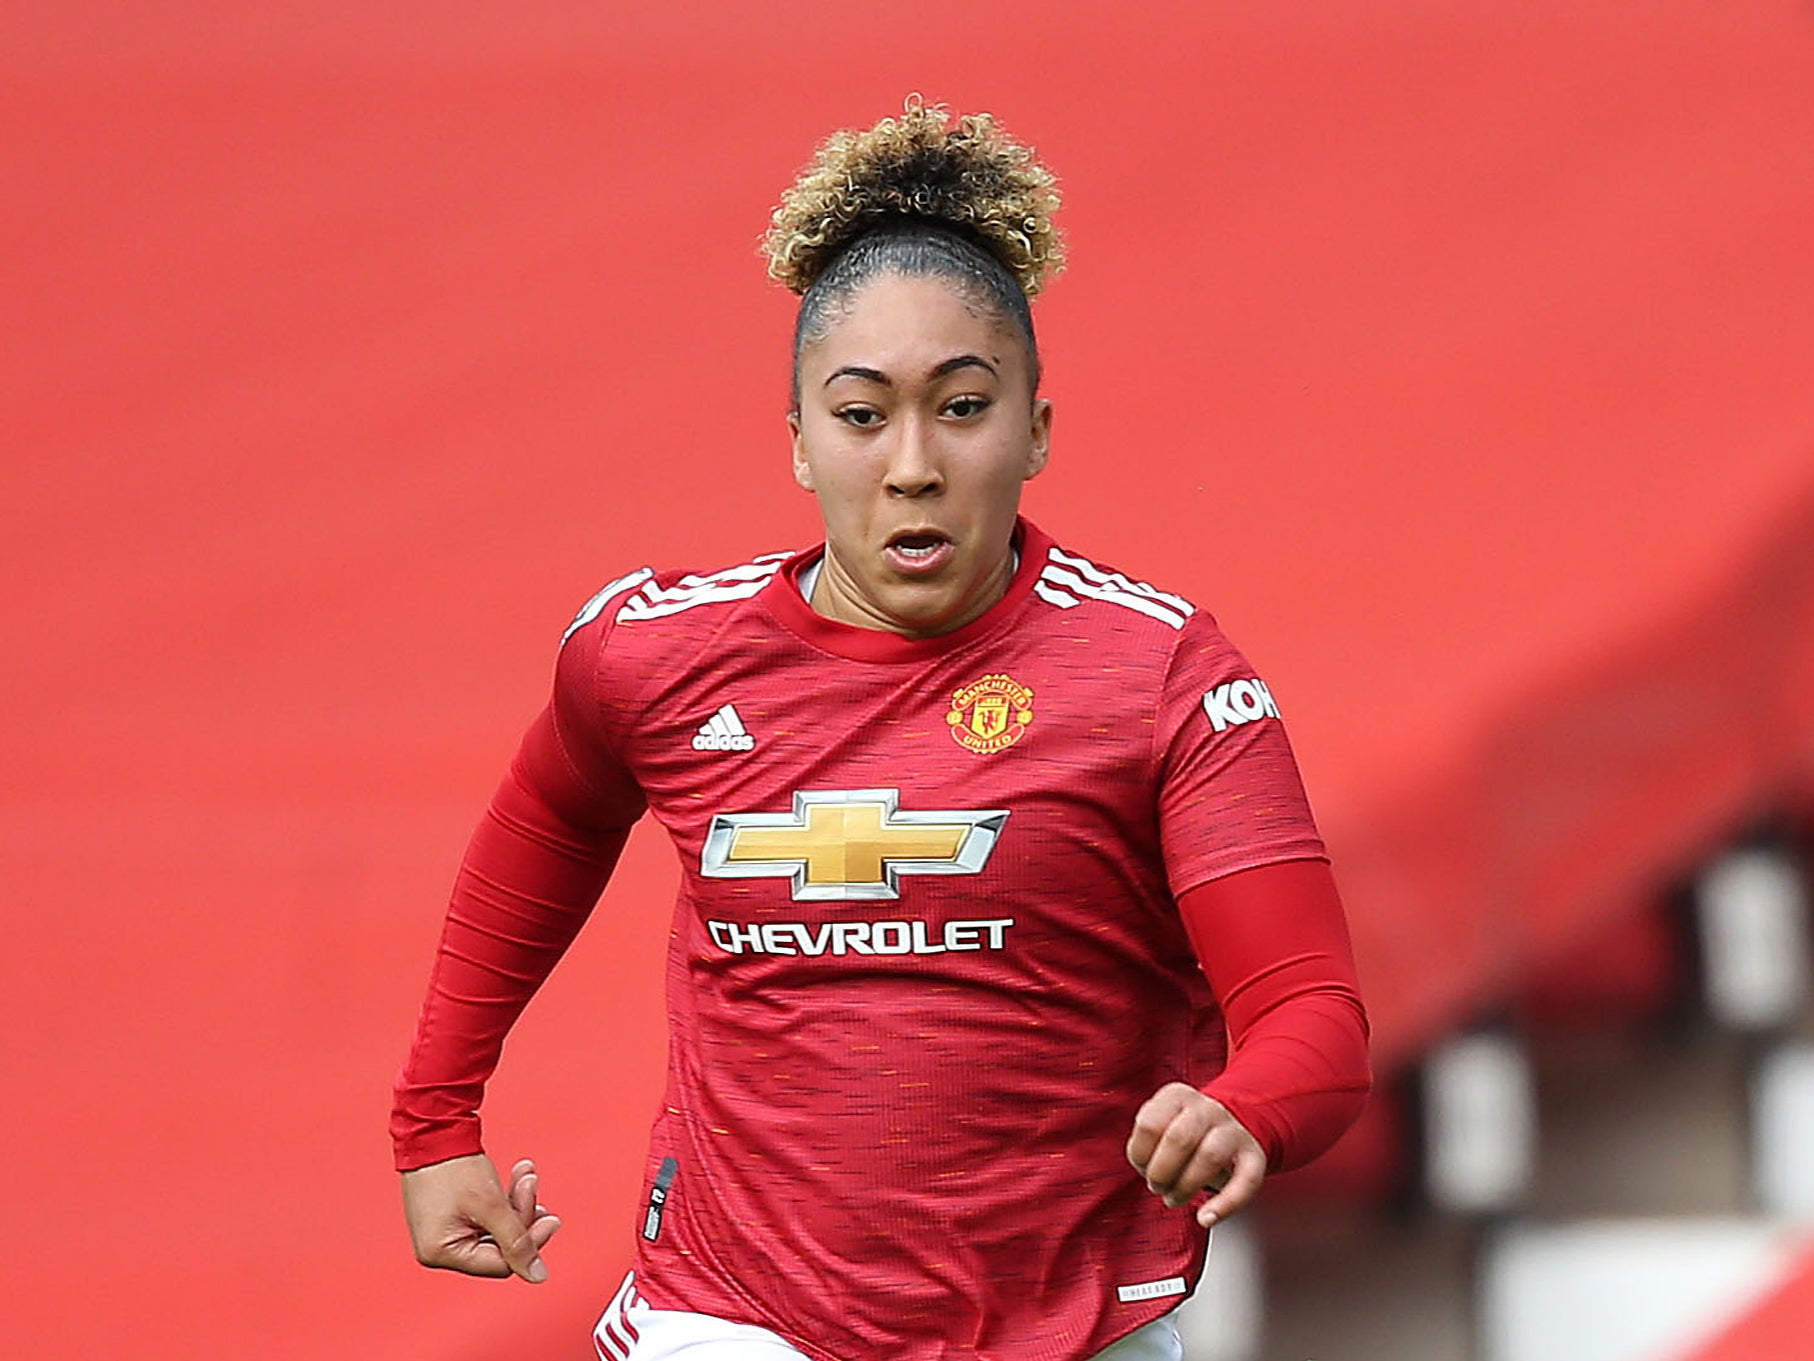 Lauren James has moved from Manchester United